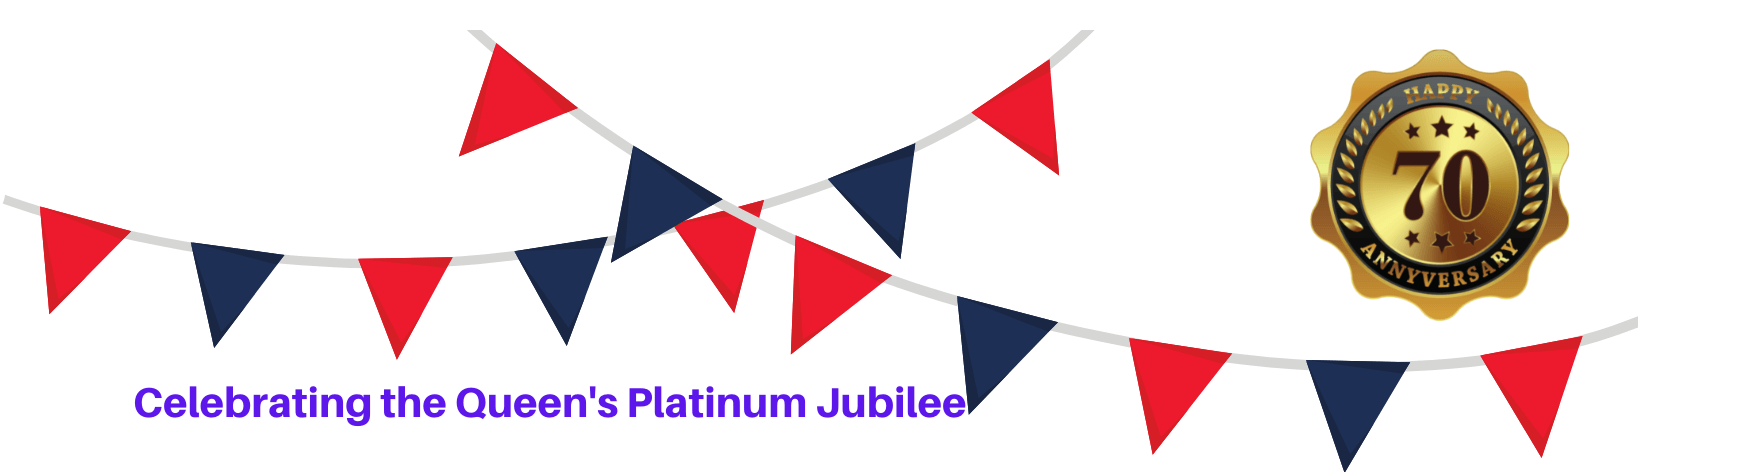 a banner with red , white and blue flags celebrating the queen 's platinum jubilee